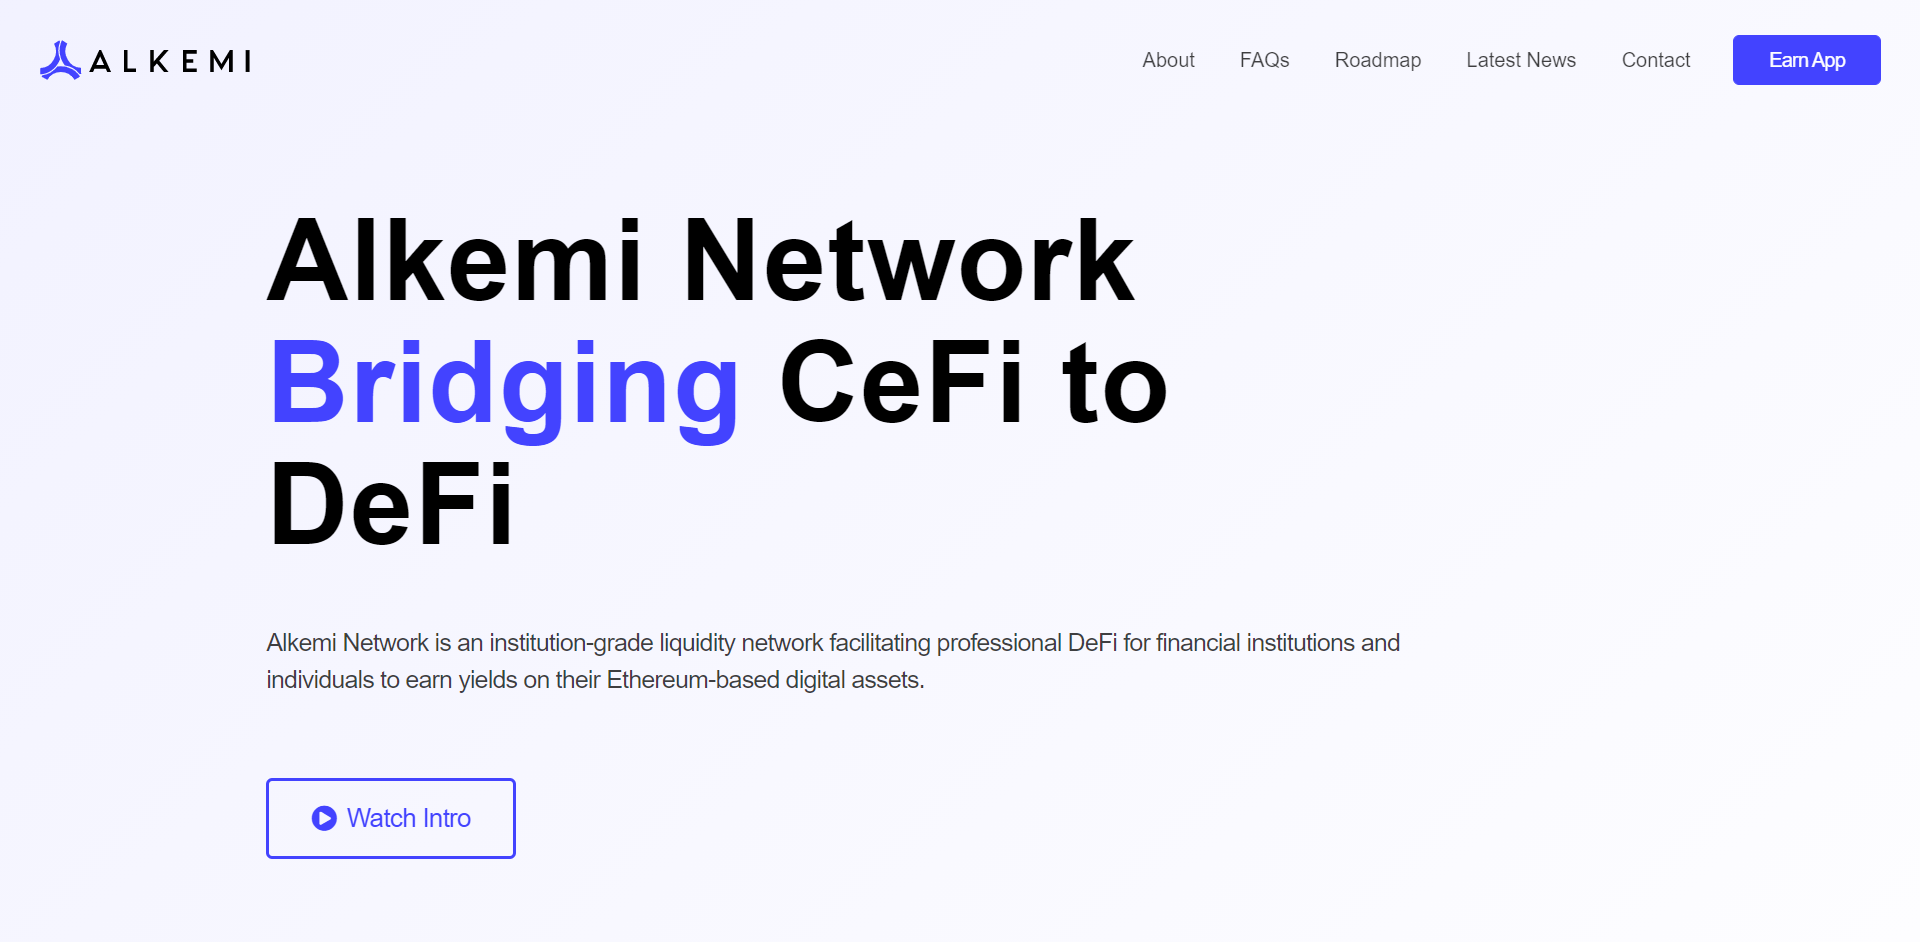 Alkemi Network empowers CeFi with DeFi tooling